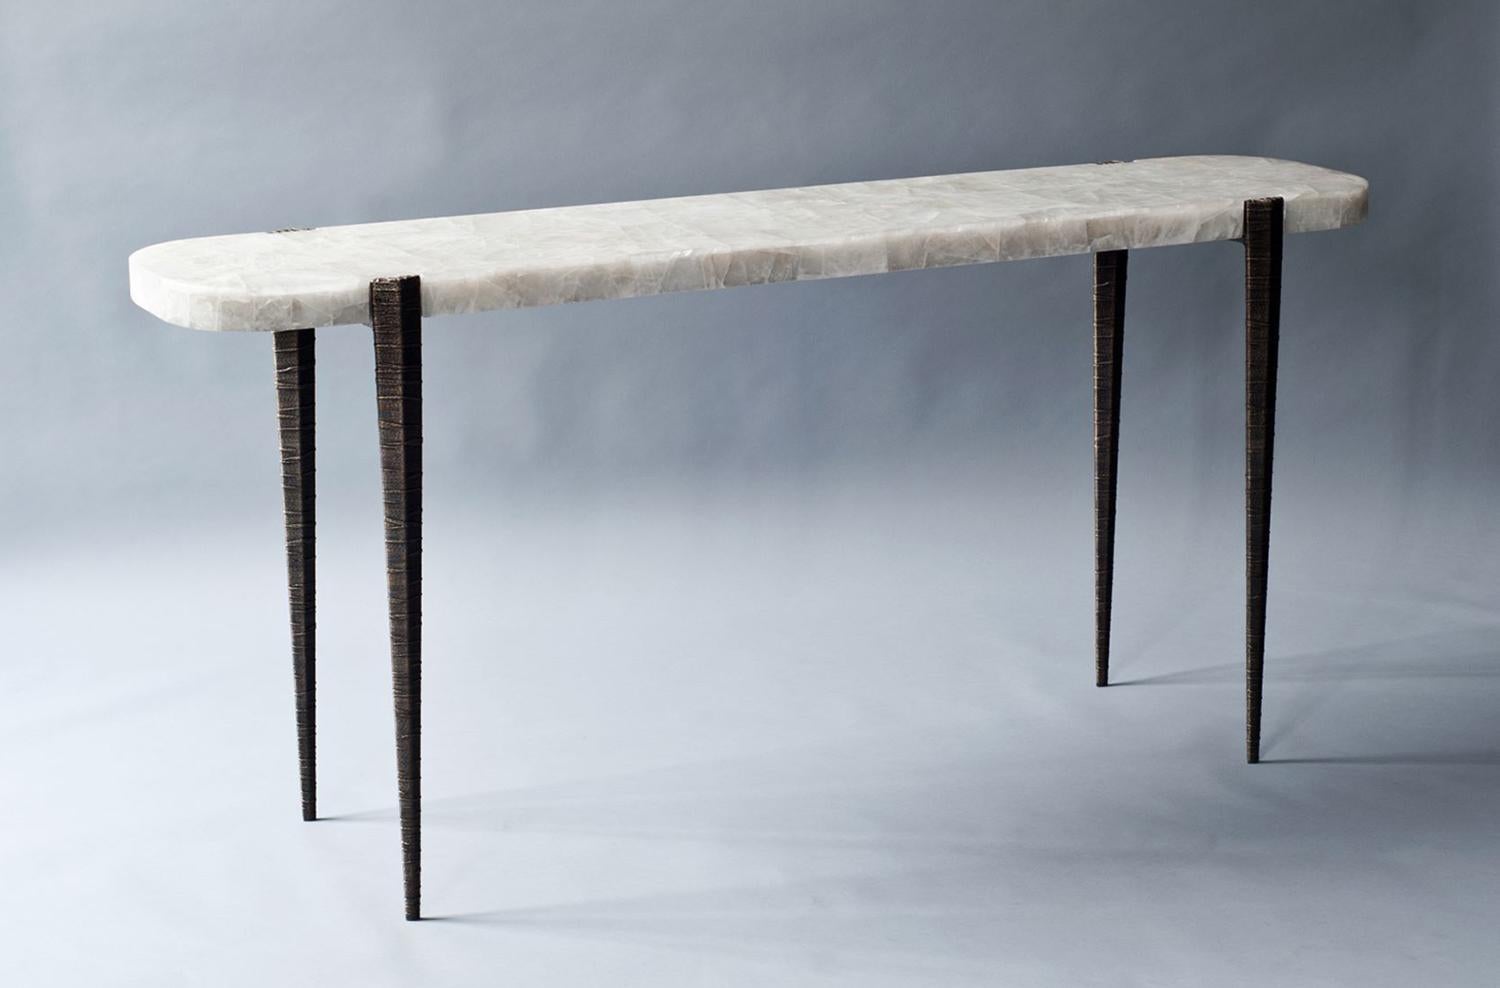 The bind console by DeMuro Das features a stone top in leathered white quartz. The top is supported by elegantly tapered and textured hand-cast legs in solid antique bronze.